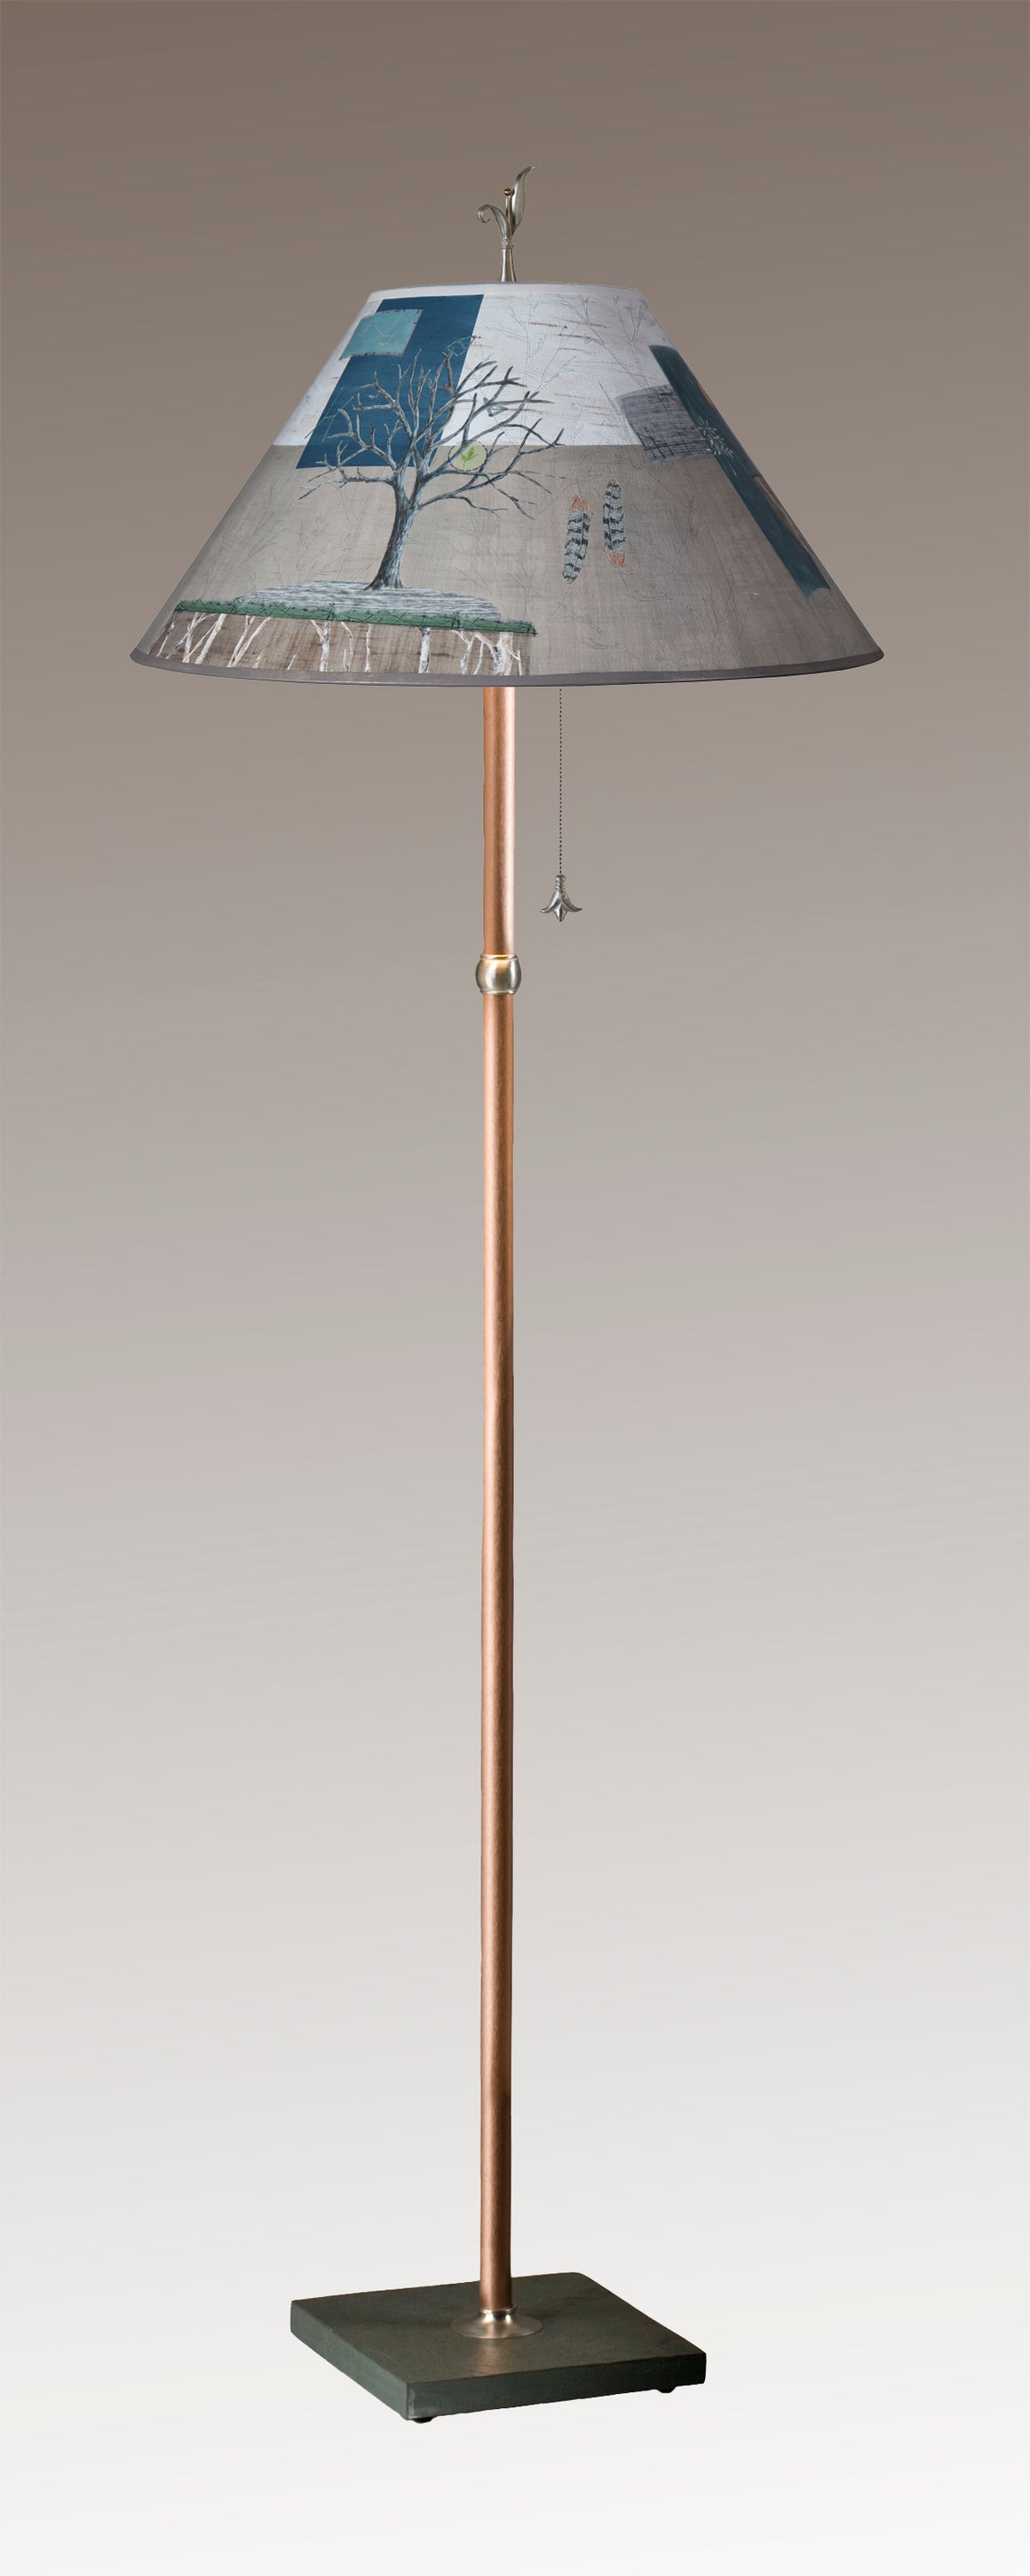 Copper Floor Lamp with Large Conical Shade in Wander in Drift